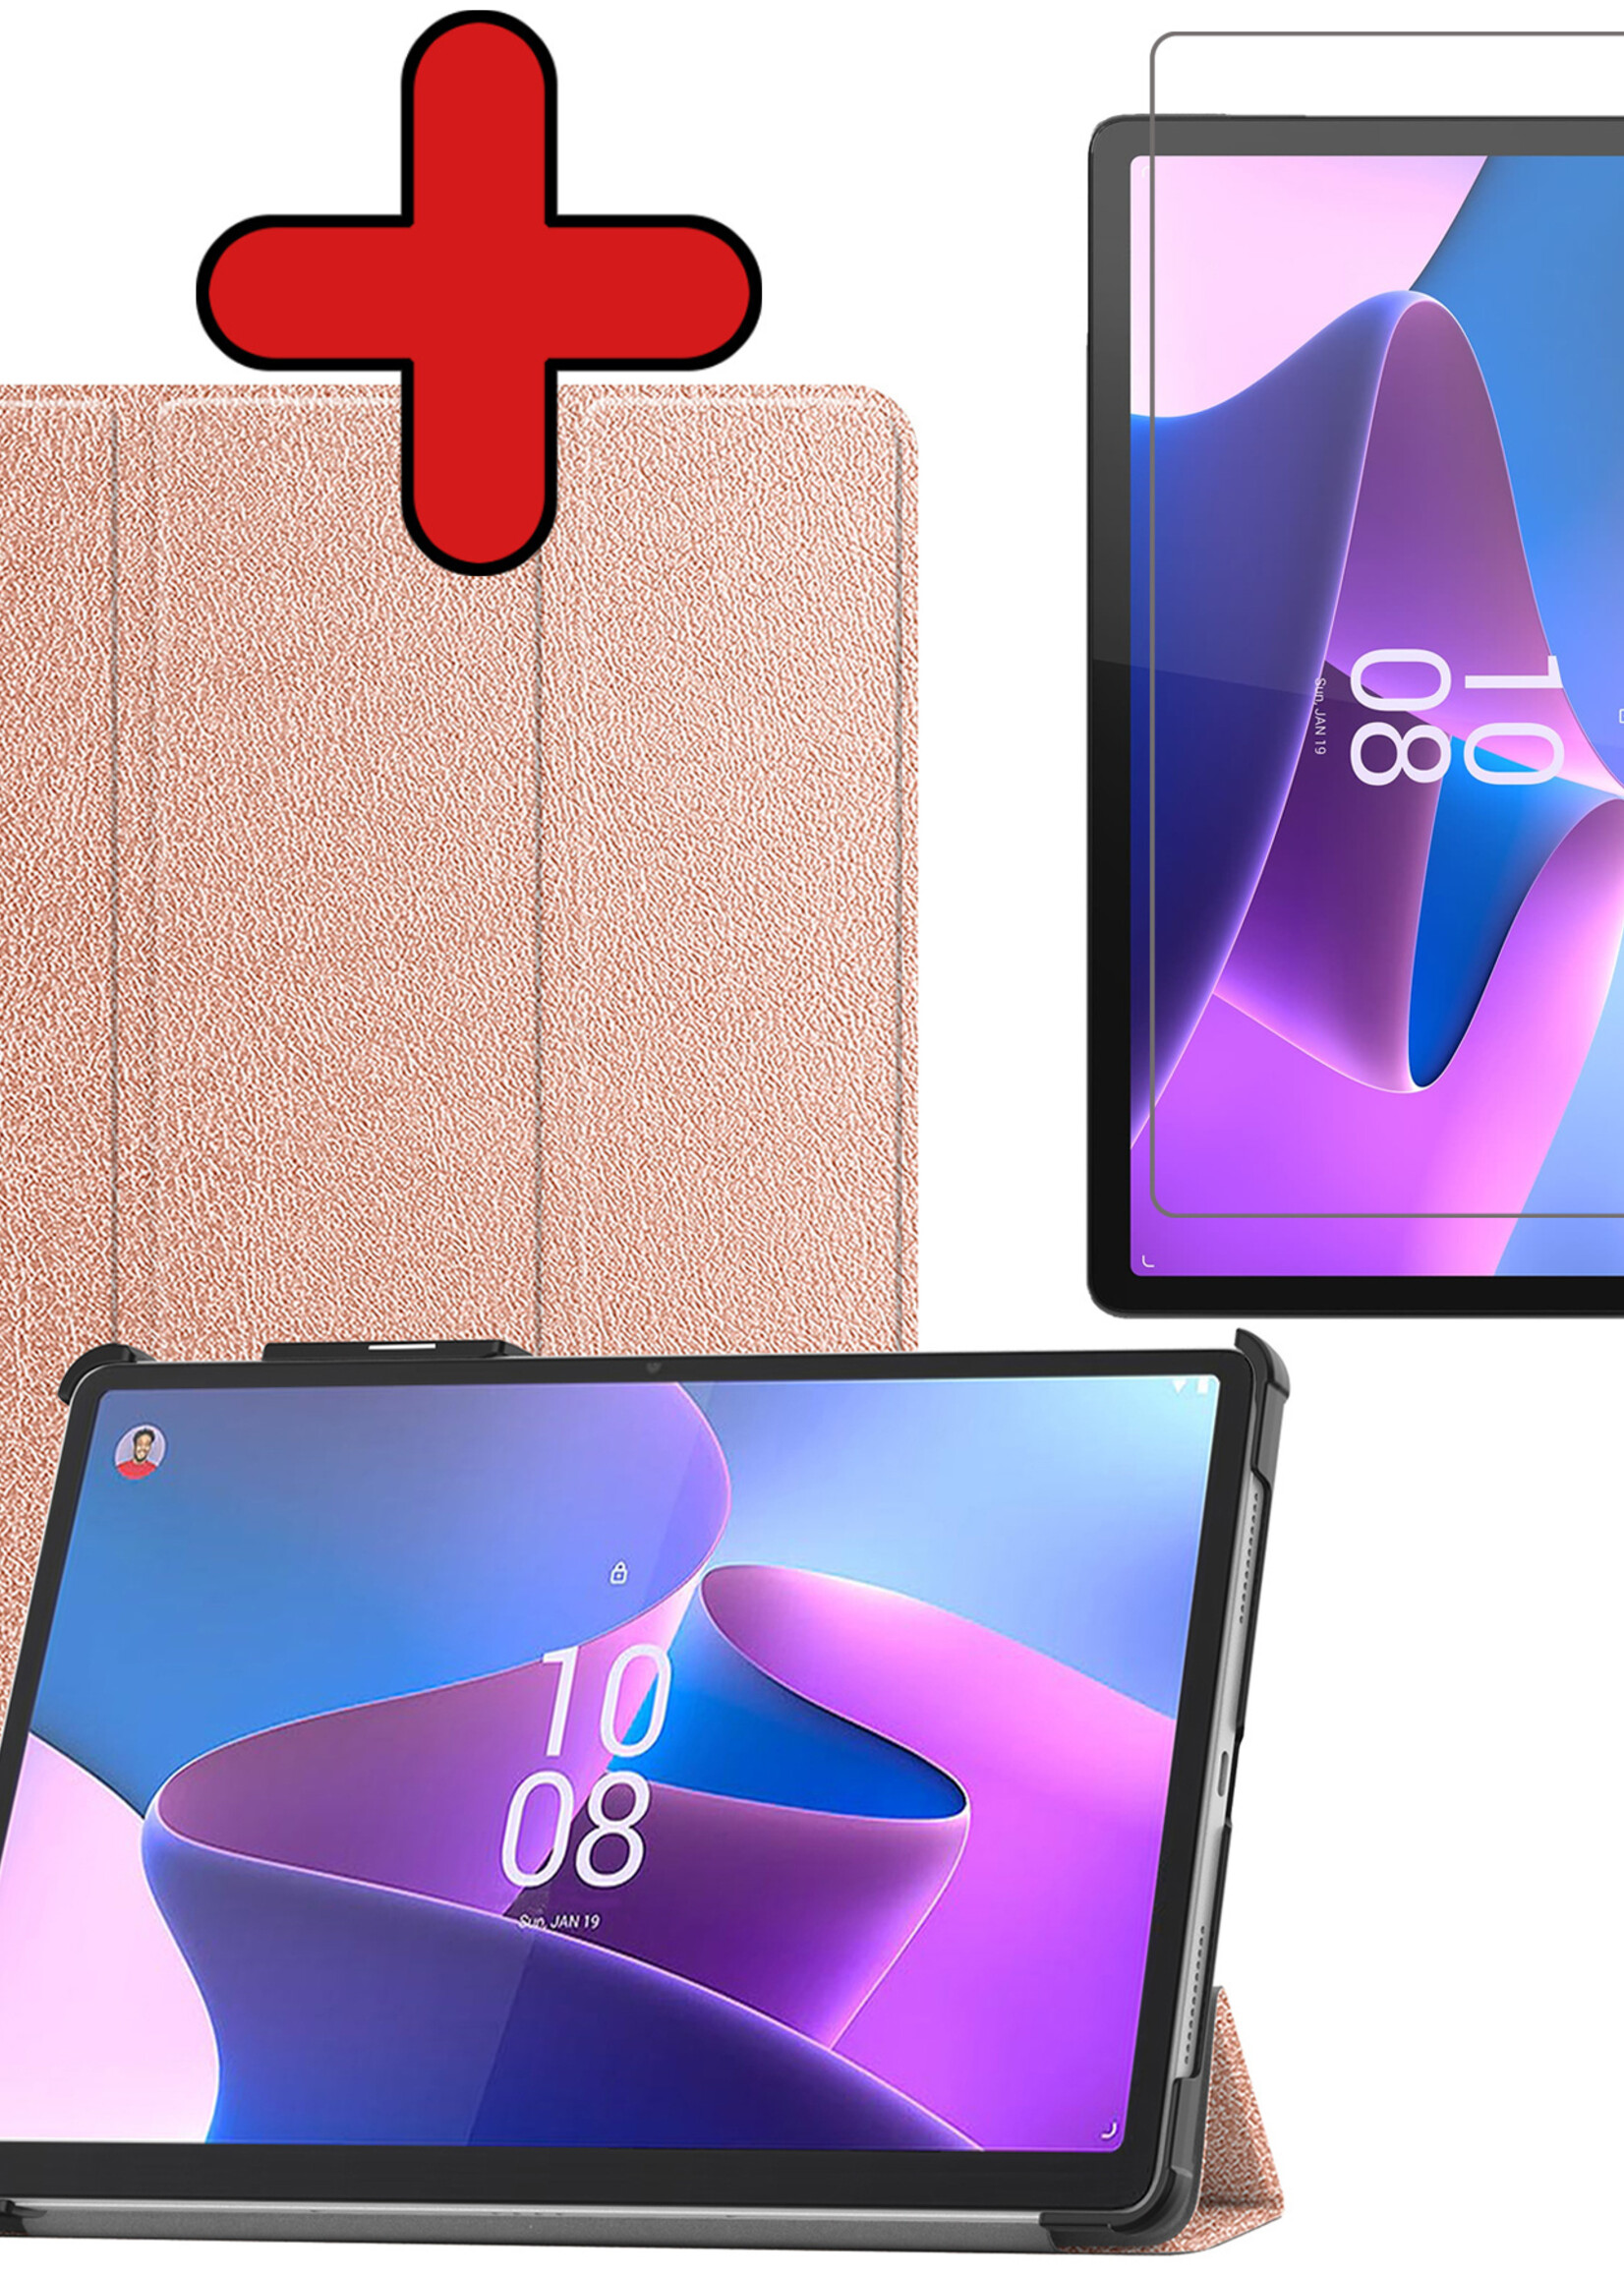 BTH Hoes Geschikt voor Lenovo Tab P11 Pro Hoes Book Case Hoesje Trifold Cover Met Uitsparing Geschikt voor Lenovo Pen Met Screenprotector - Hoesje Geschikt voor Lenovo Tab P11 Pro Hoesje Bookcase - Rosé goud